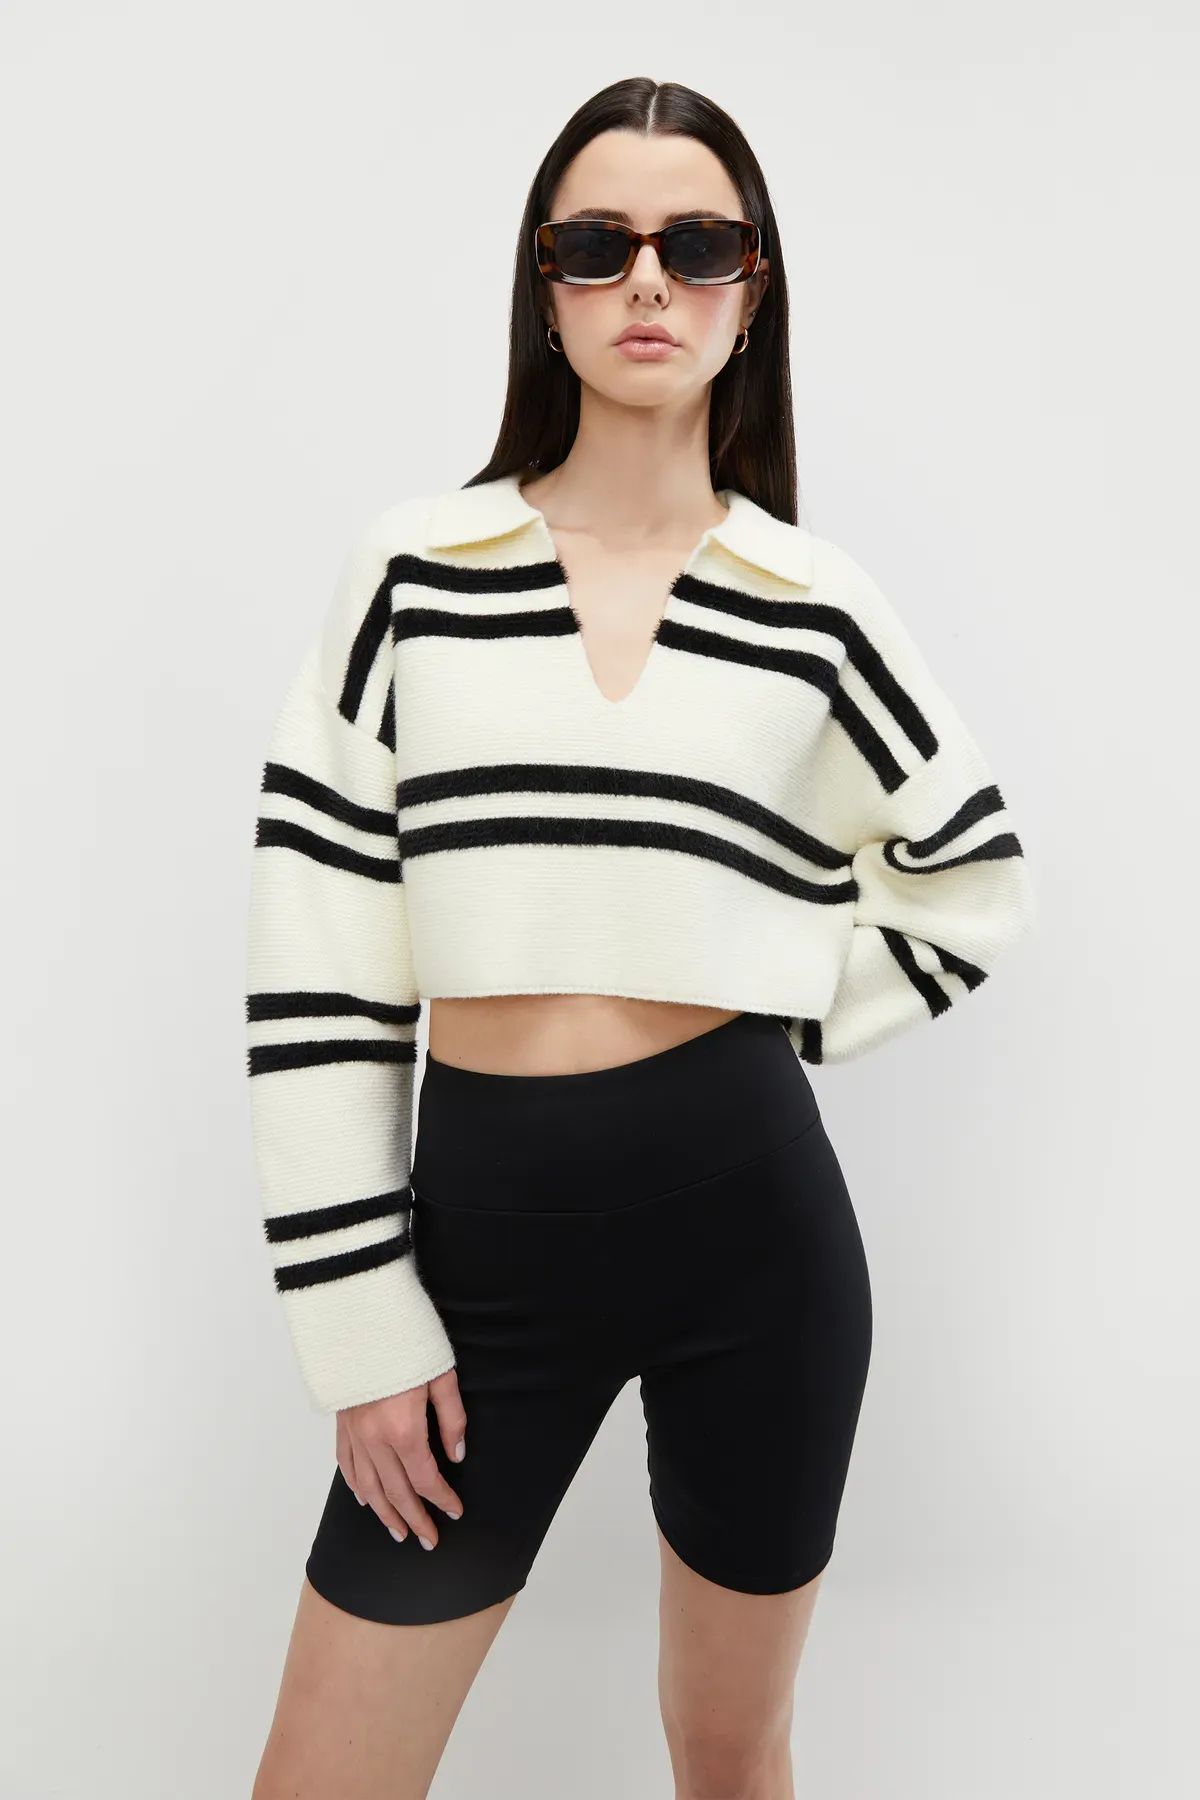 COLLARED STRIPED SWEATER $52  Flash Sale 20% Off - Automatically applied in cart    
 SW-7478-W  ... | OAK + FORT